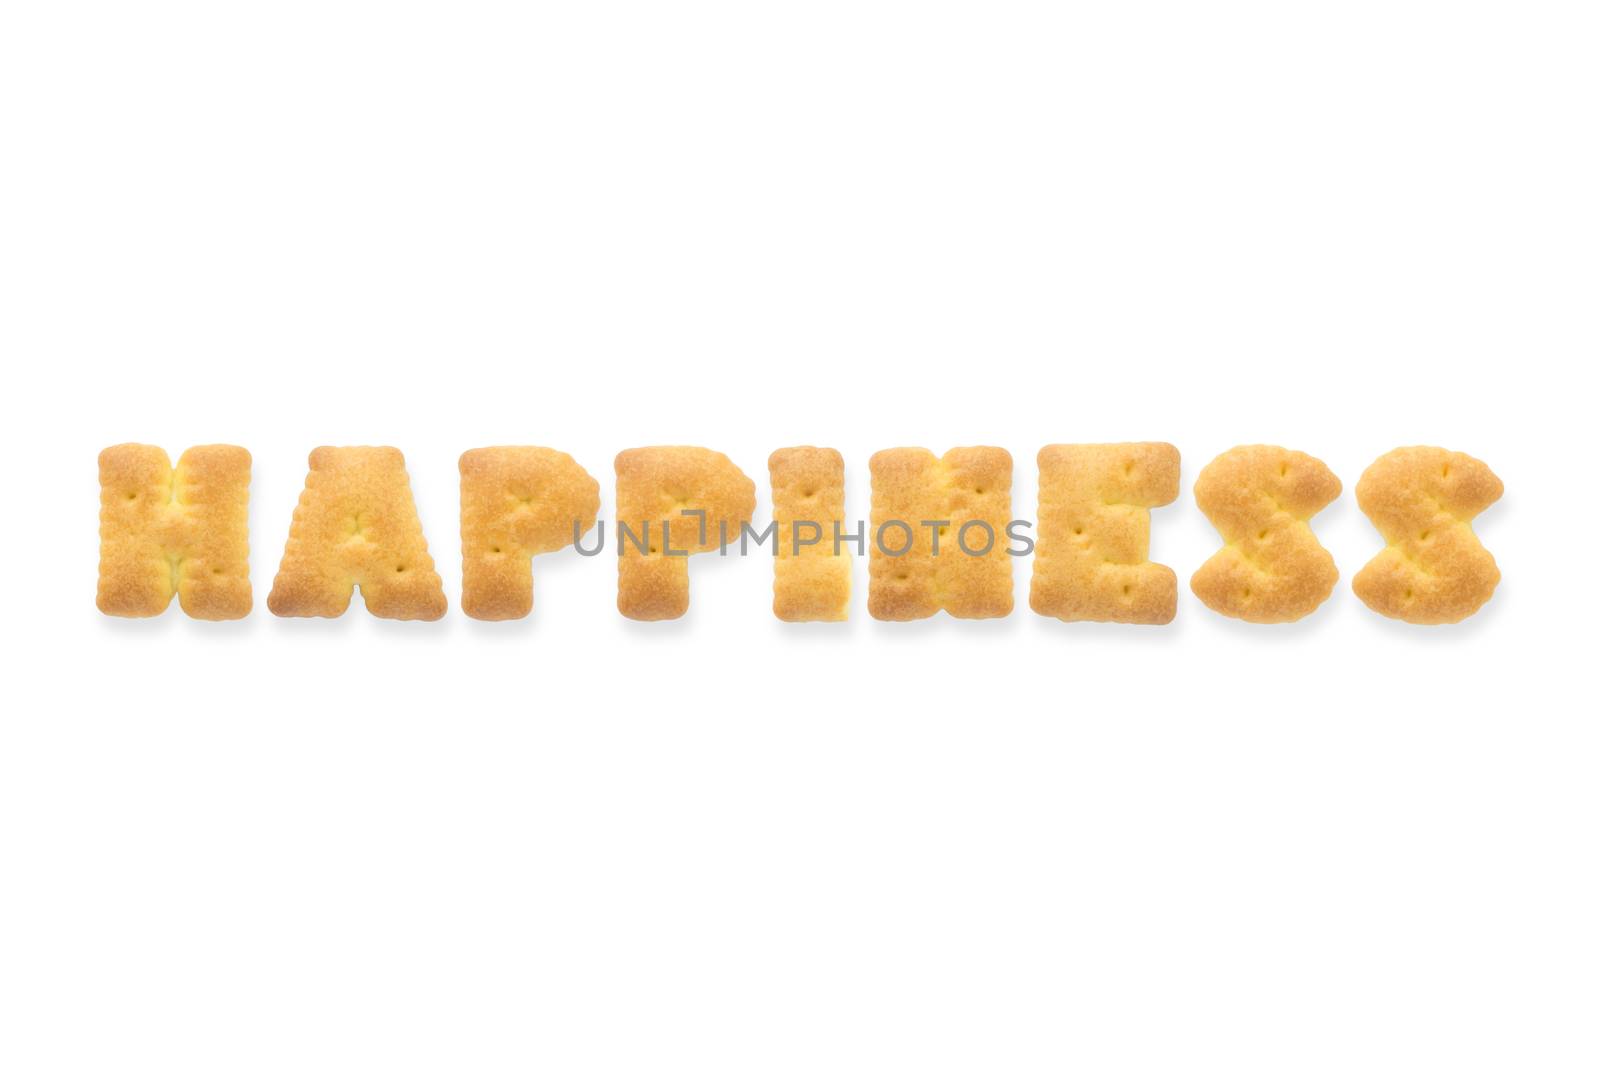 The Letter Word HAPPINESS Alphabet Biscuit Cracker by vinnstock